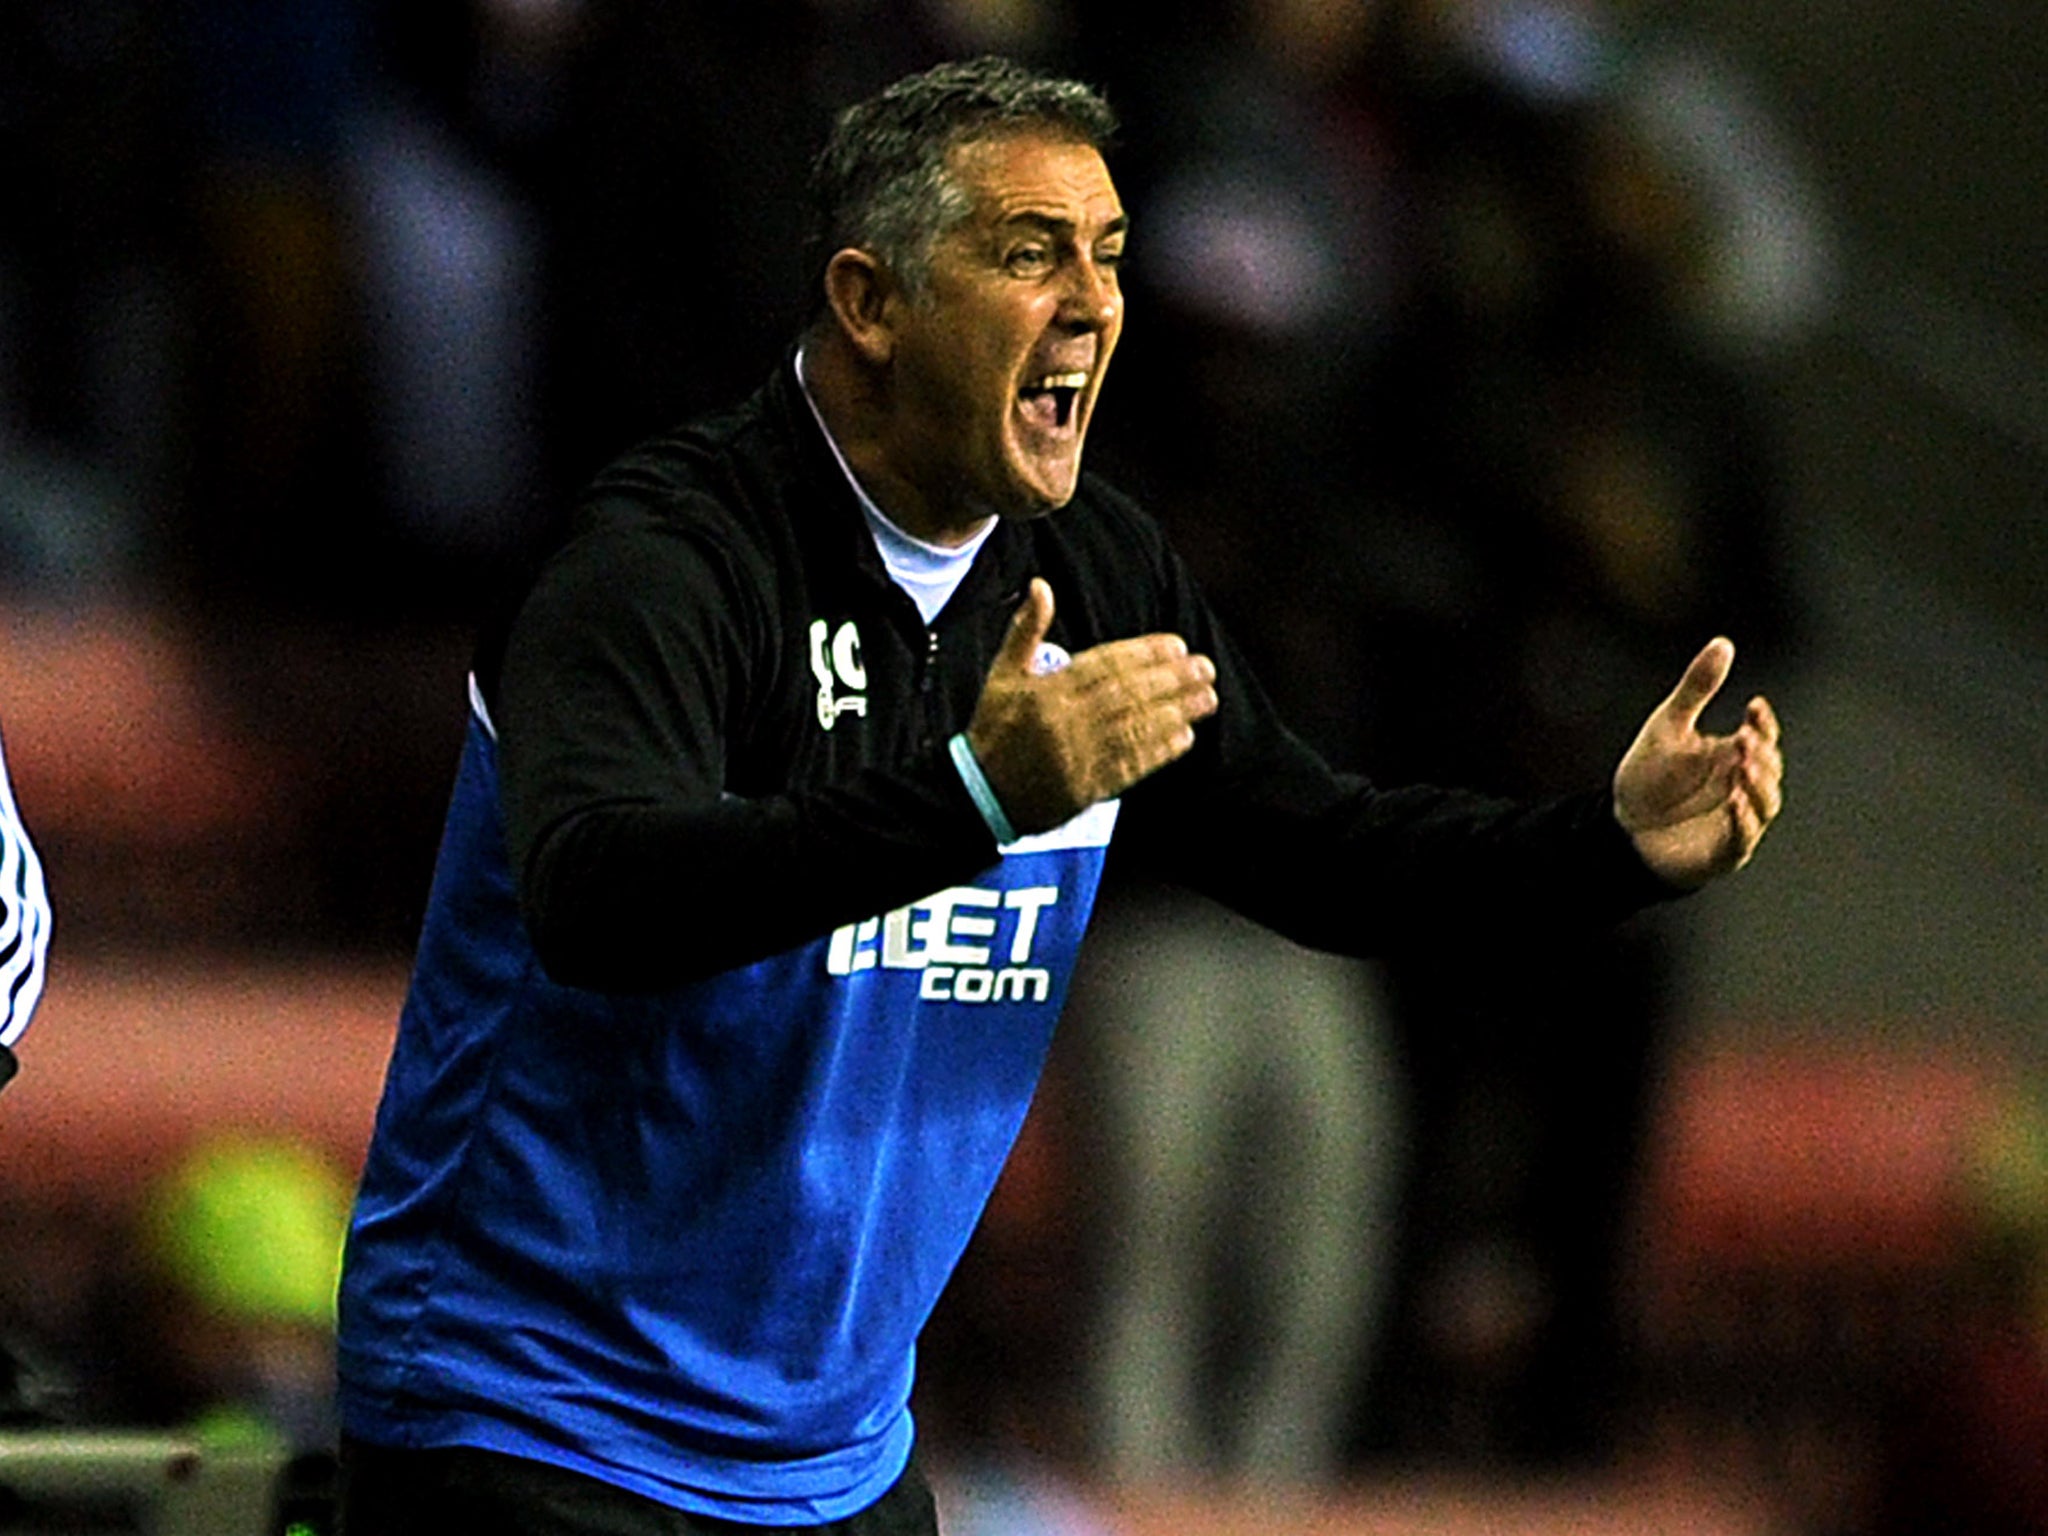 Owen Coyle was pleased with his side's performance in the 1-1 draw with Rubin Kazan